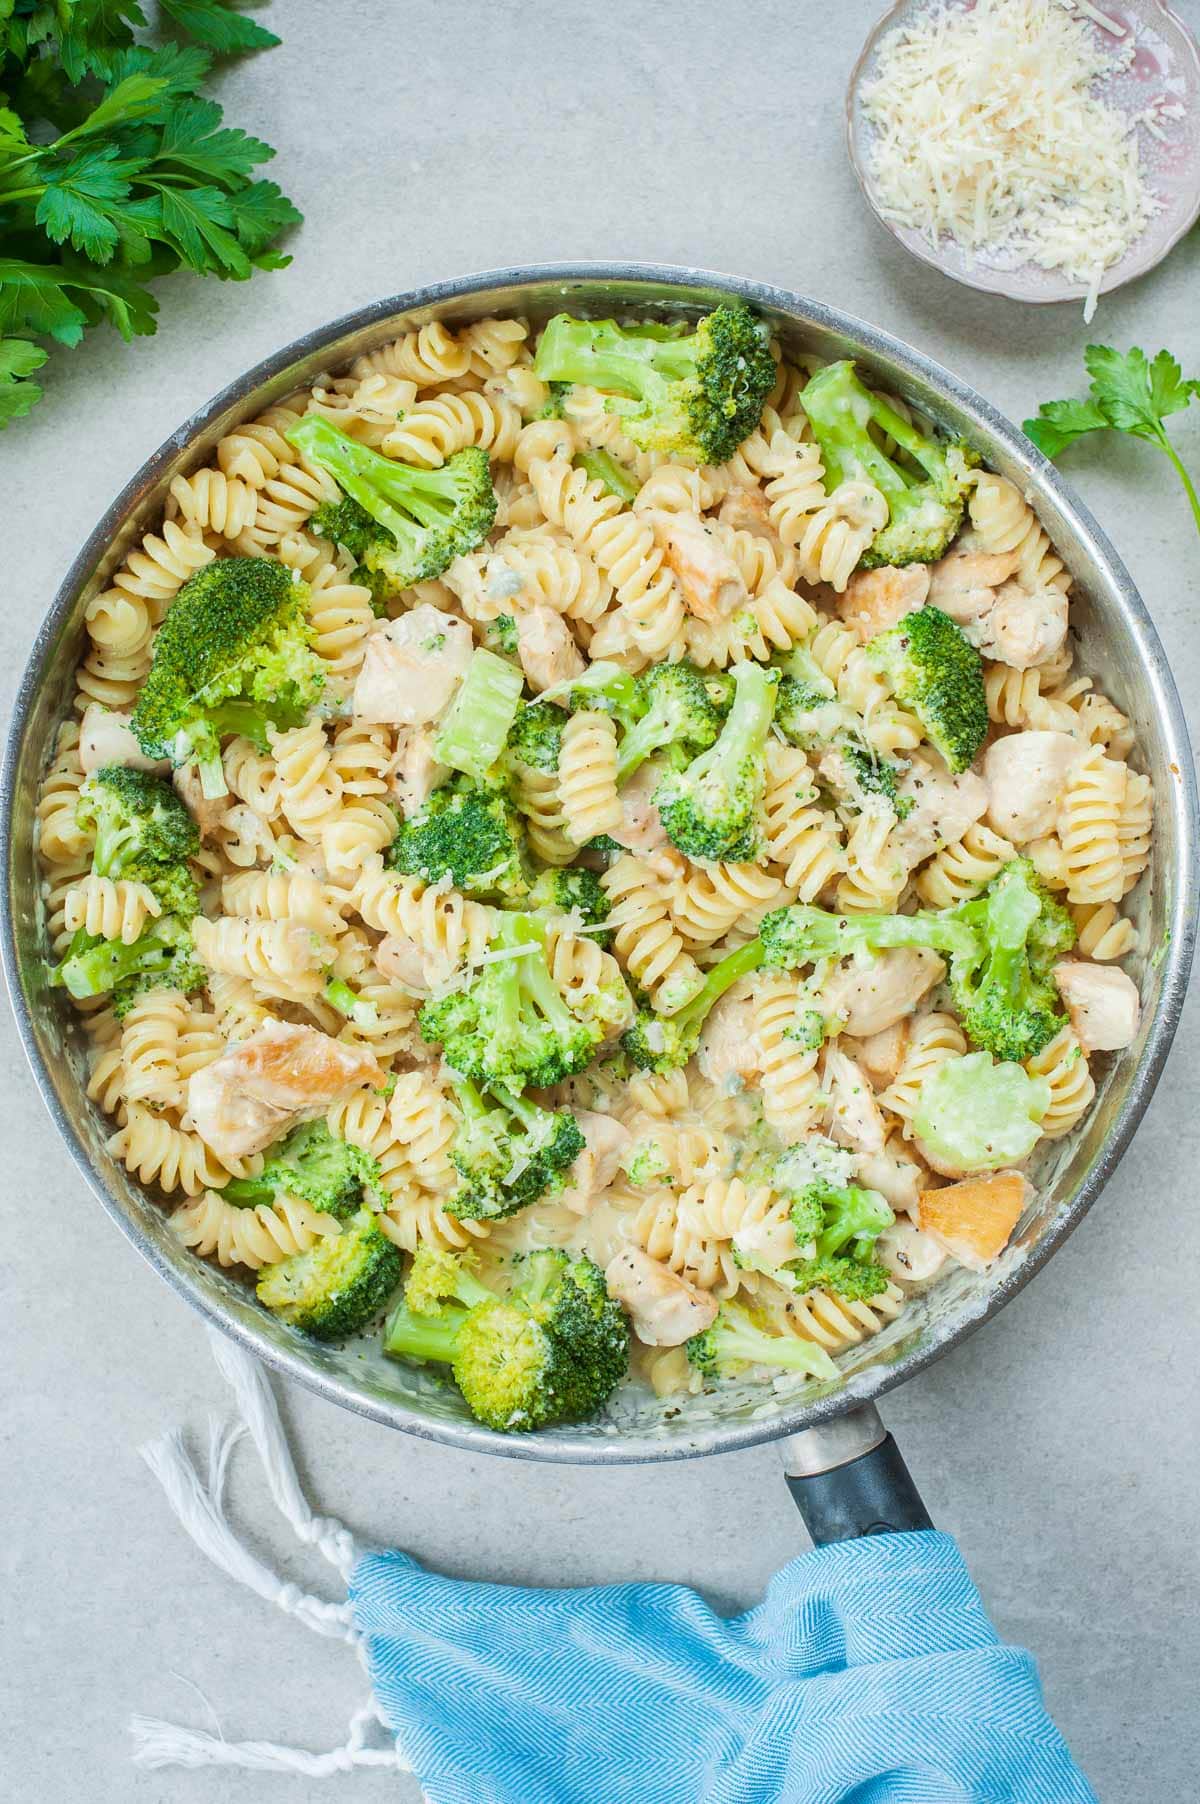 Four cheese pasta with chicken and broccoli in a frying pan.